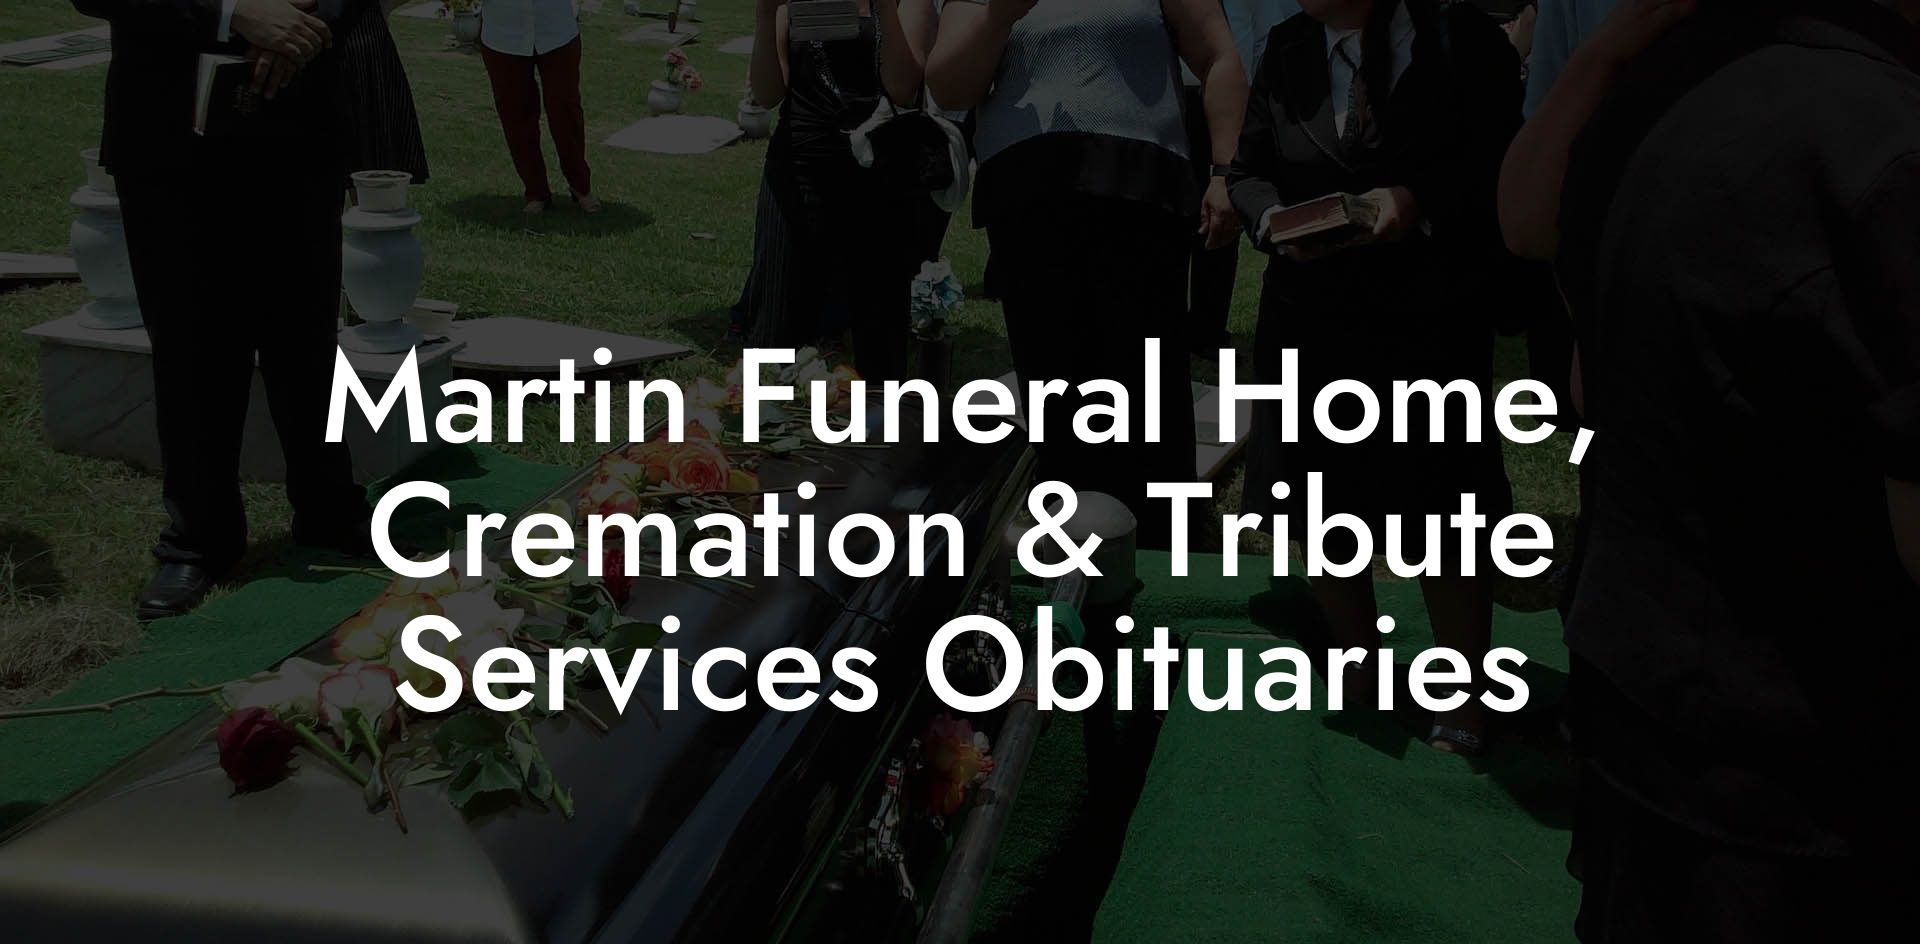 Martin Funeral Home, Cremation & Tribute Services Obituaries